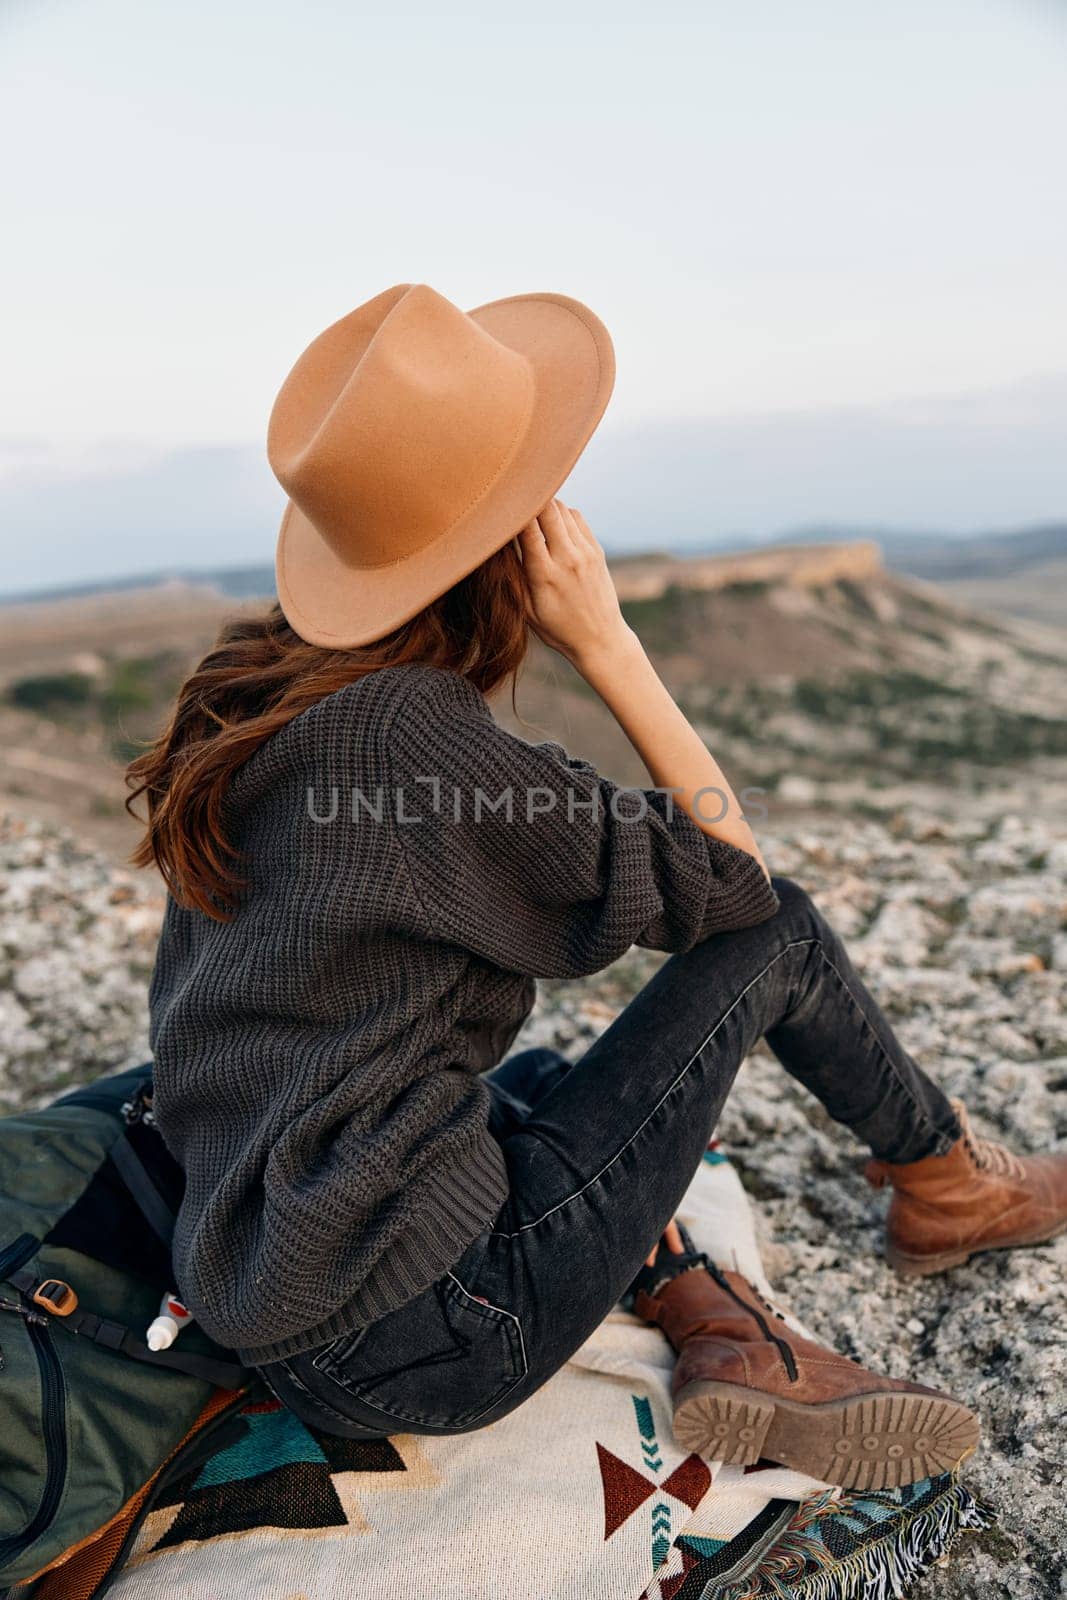 Woman in hat sitting on blanket with backpack, gazing at horizon